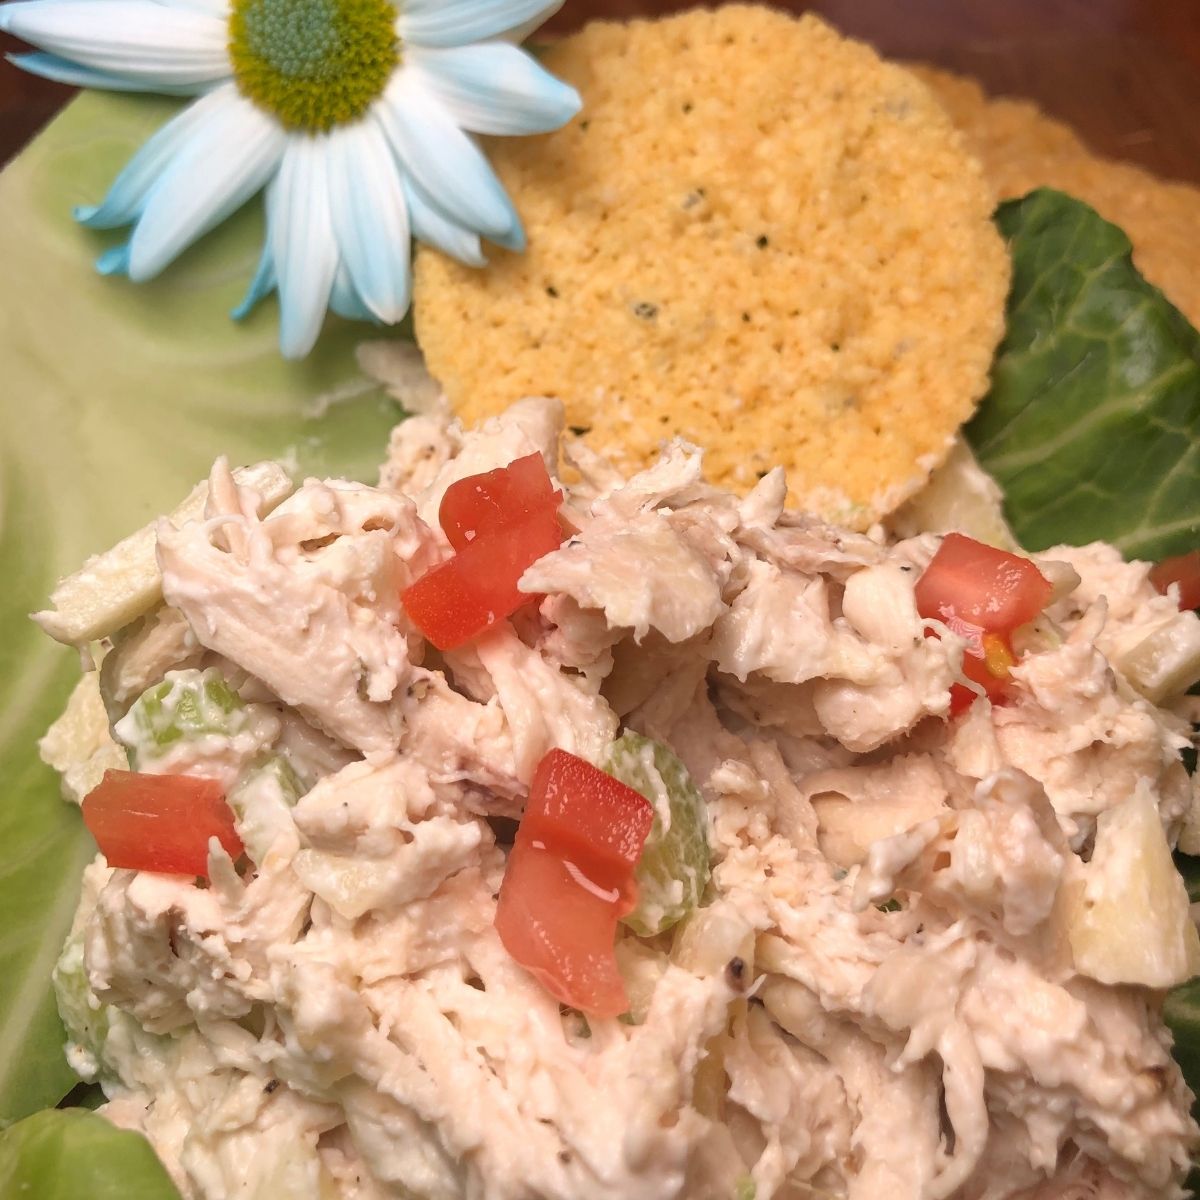 WW Ranch chicken salad with diced tomatoes on a cabbage leaf with parmesan crisp chip and a white daisy